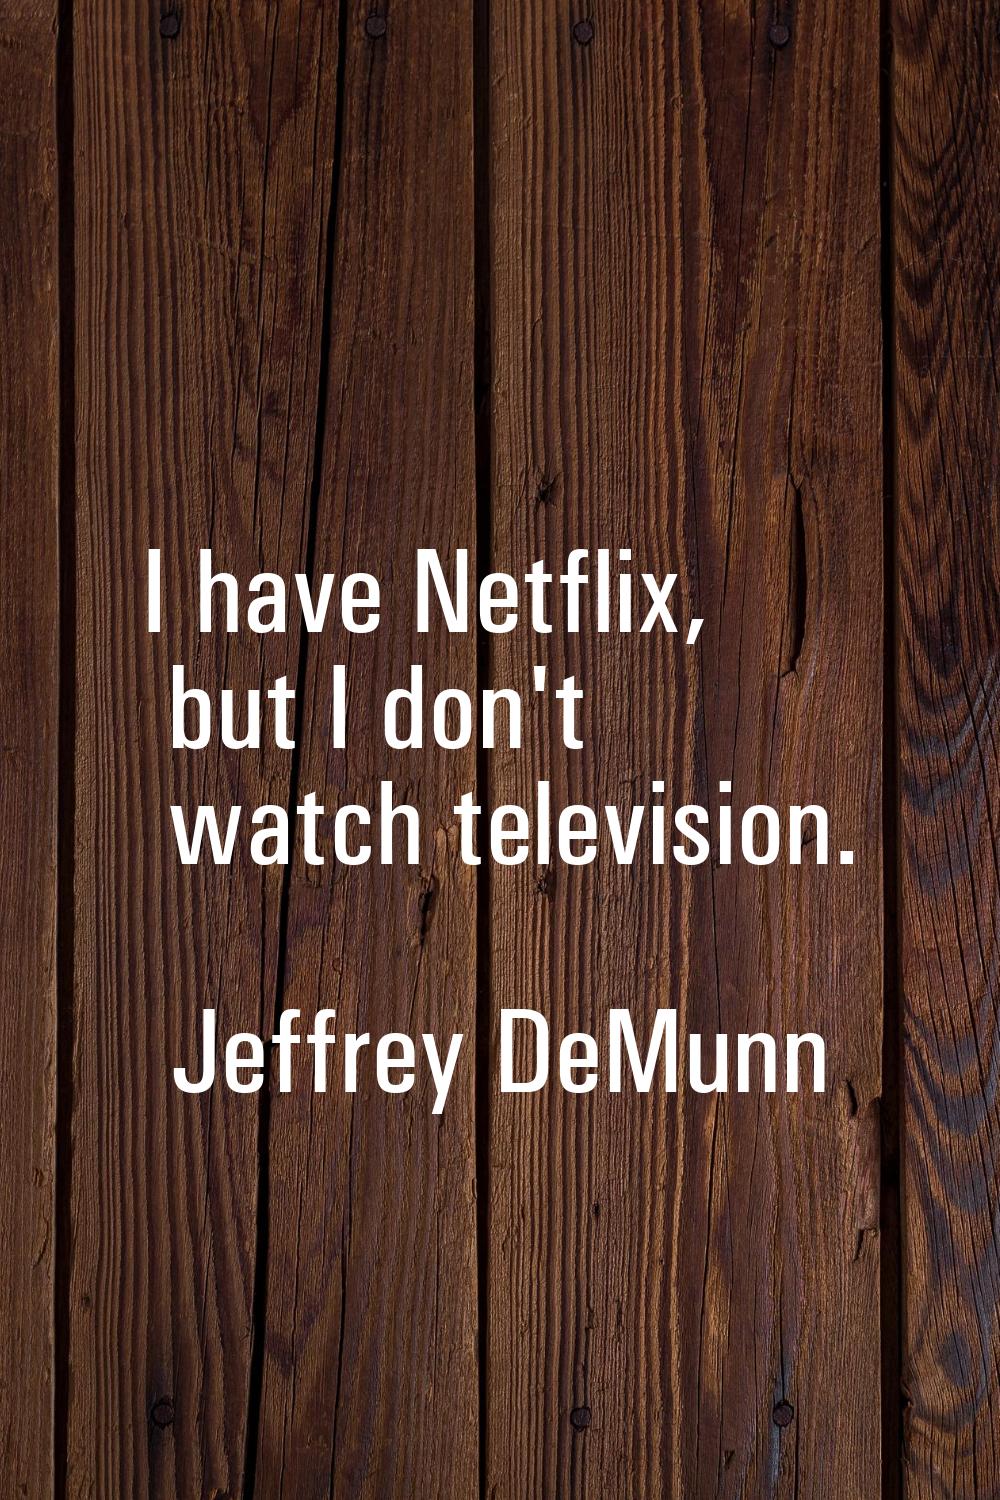 I have Netflix, but I don't watch television.